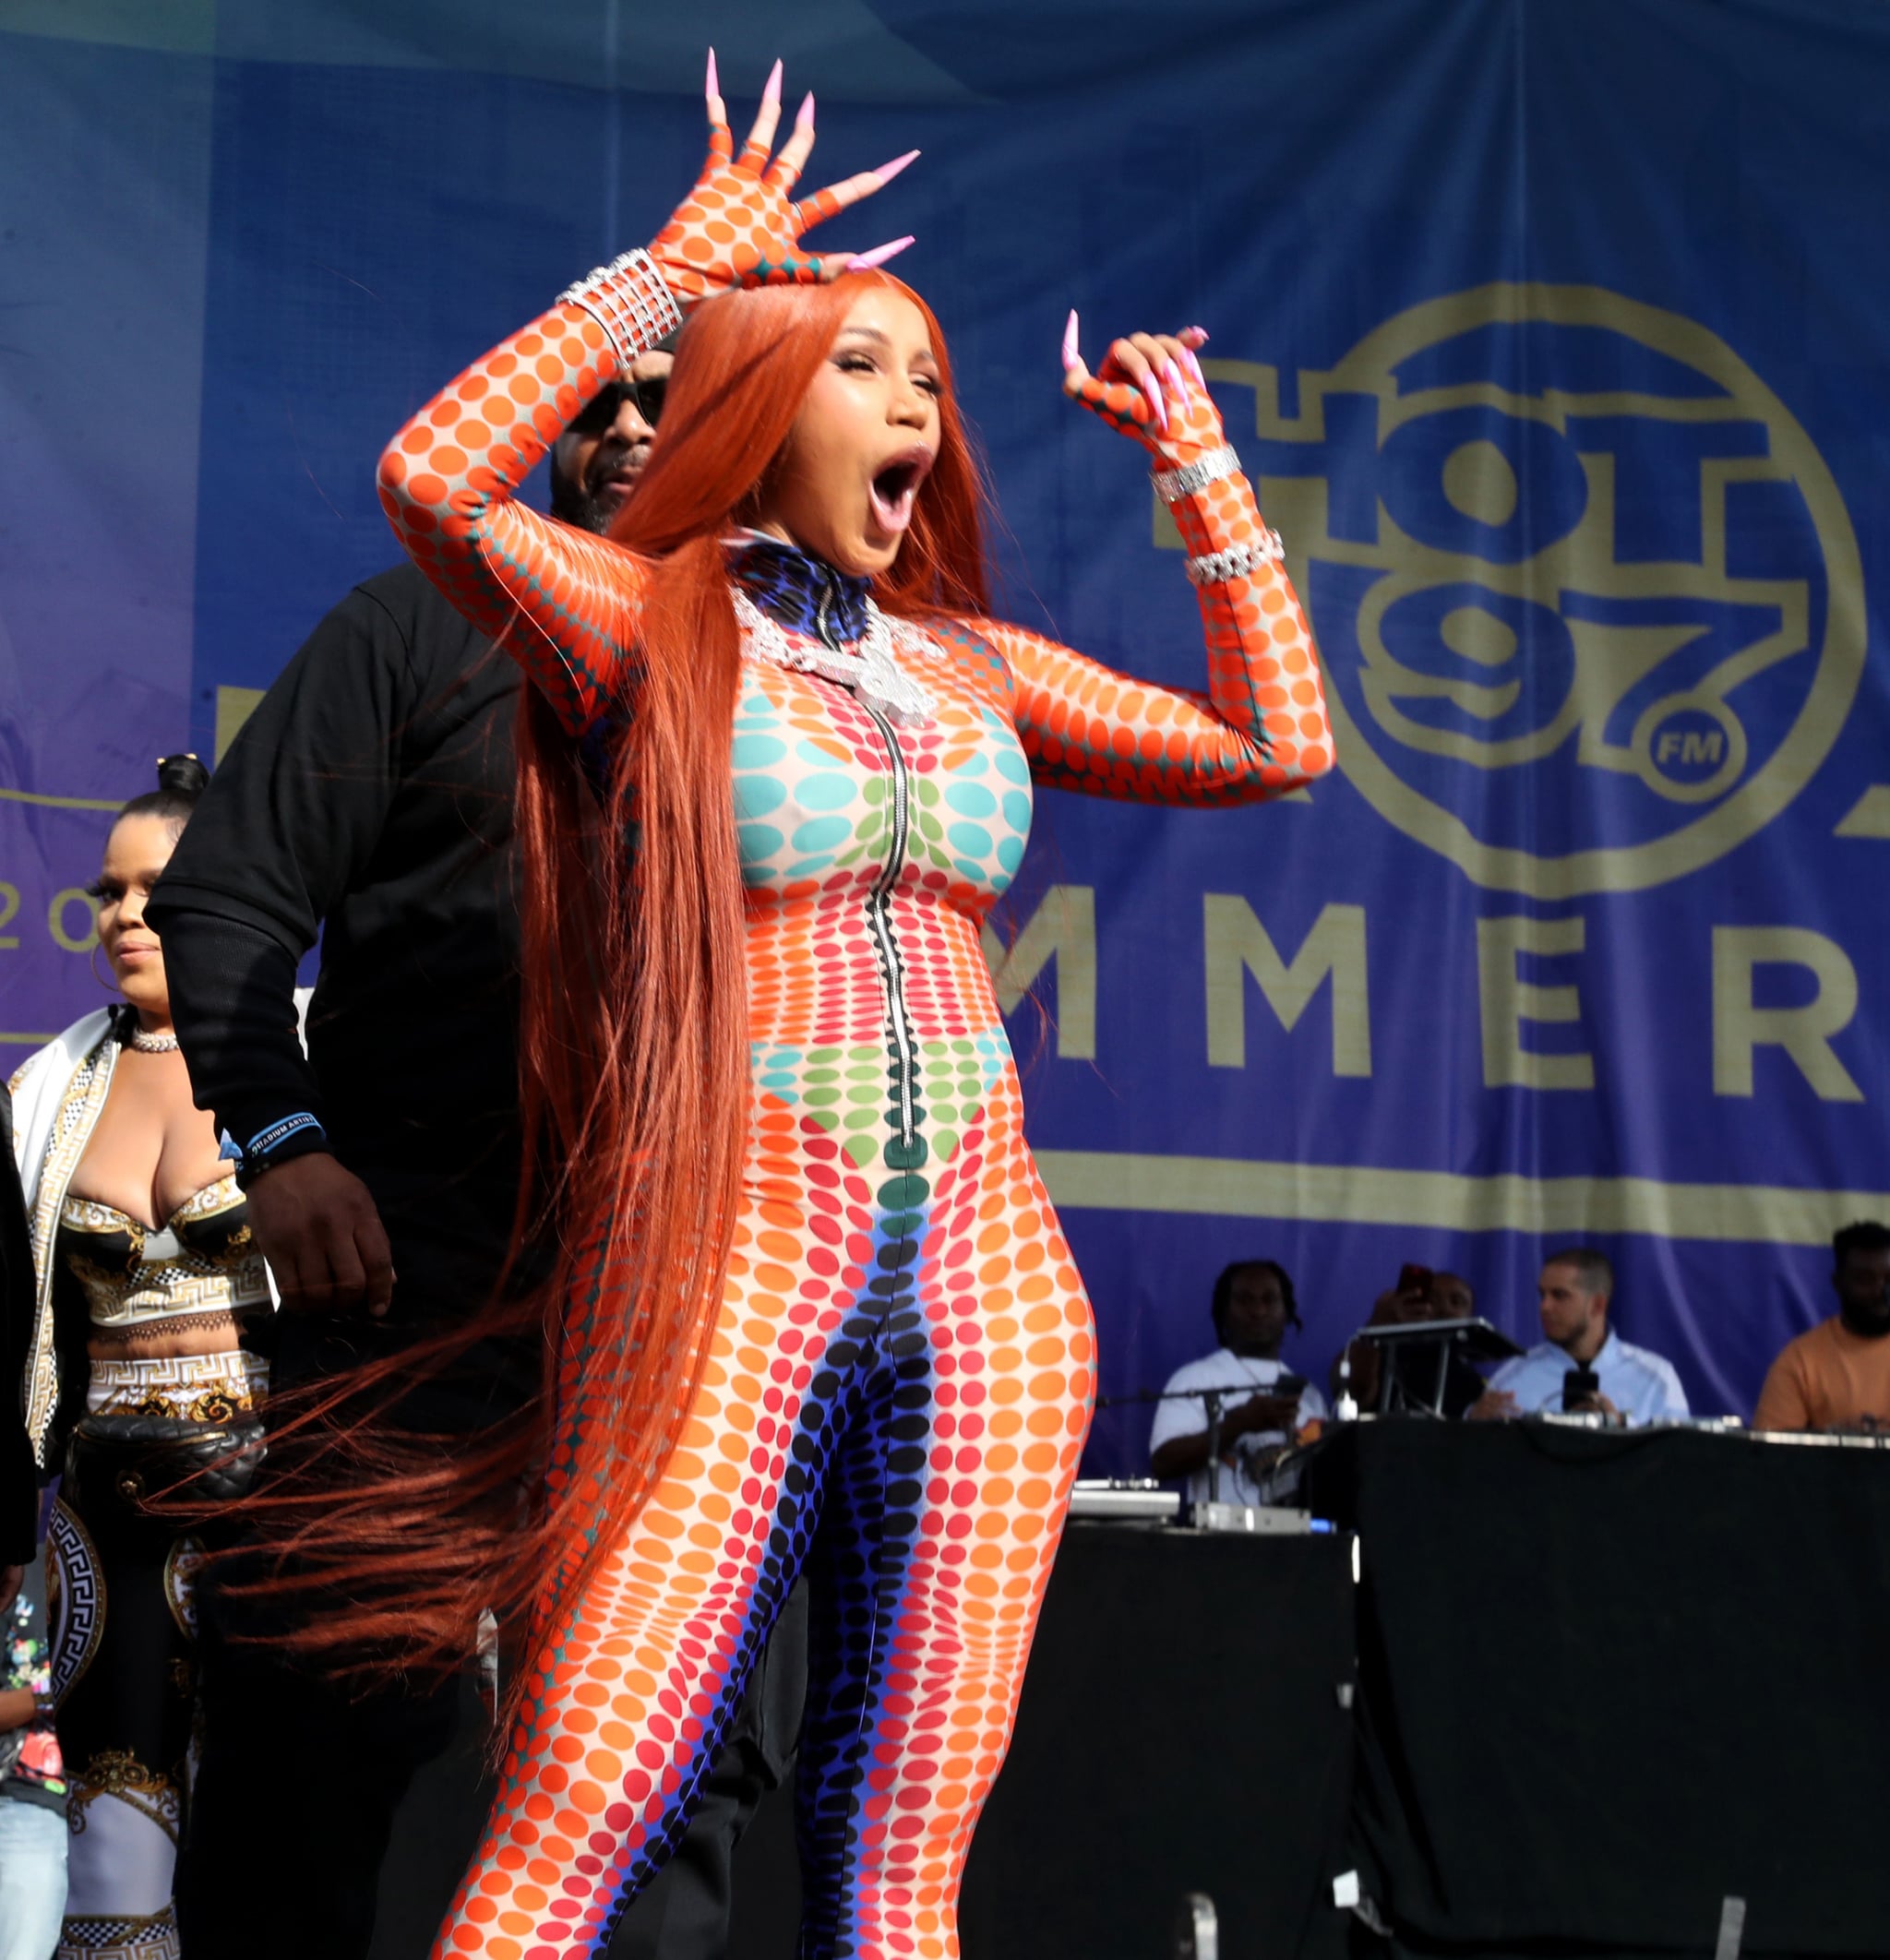 EAST RUTHERFORD, NEW JERSEY - JUNE 12: Cardi B performs during 2022 Hot 97 Summer Jam at MetLife Stadium on June 12, 2022 in East Rutherford, New Jersey. (Photo by Johnny Nunez/WireImage)